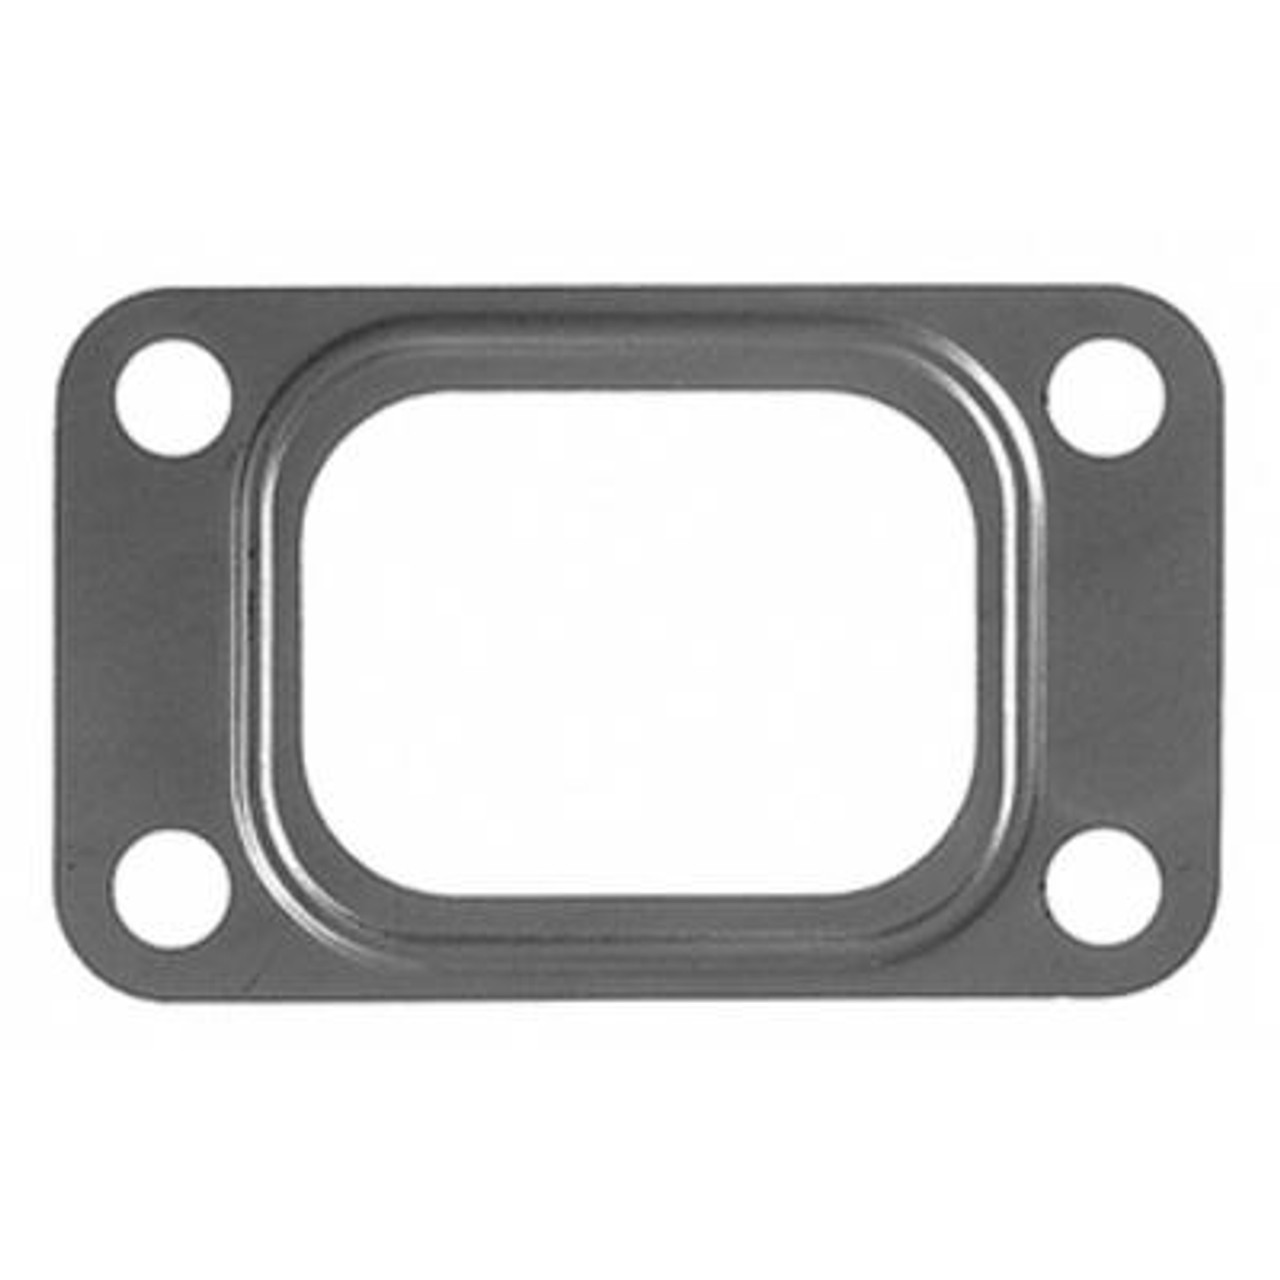 Mahle Undivided T3 Turbocharger Mounting Gasket 1992 to 2000 6.2L/6.5L Diesel 2500/3500| 1989 to 2002 5.9L Cummins (MCIF7414)-Main View